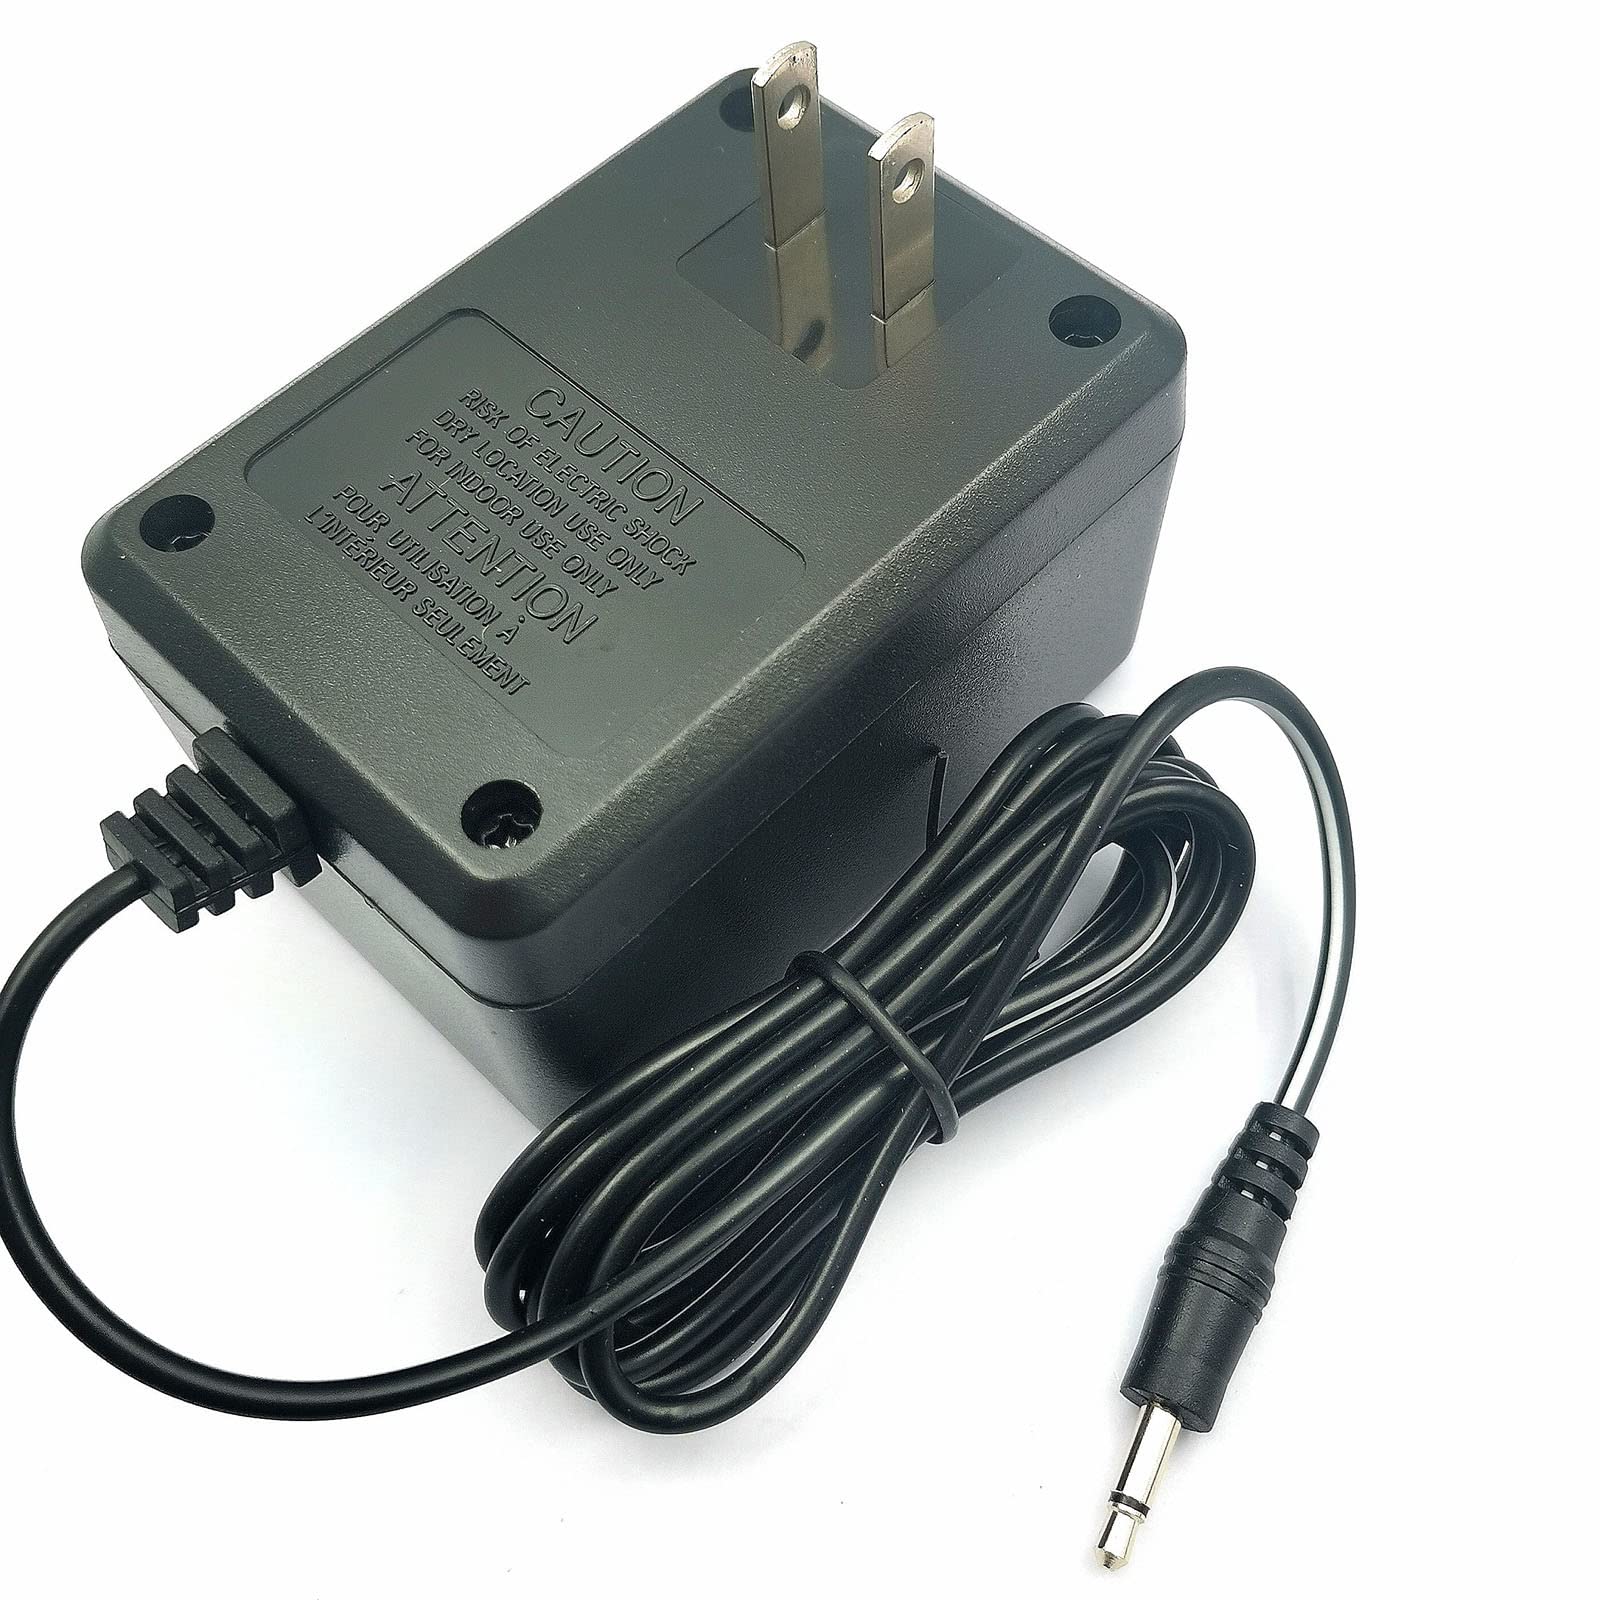 DEVMO New AC Power Supply Adapter Plug Cord Compatible with The Atari 2600 System Console